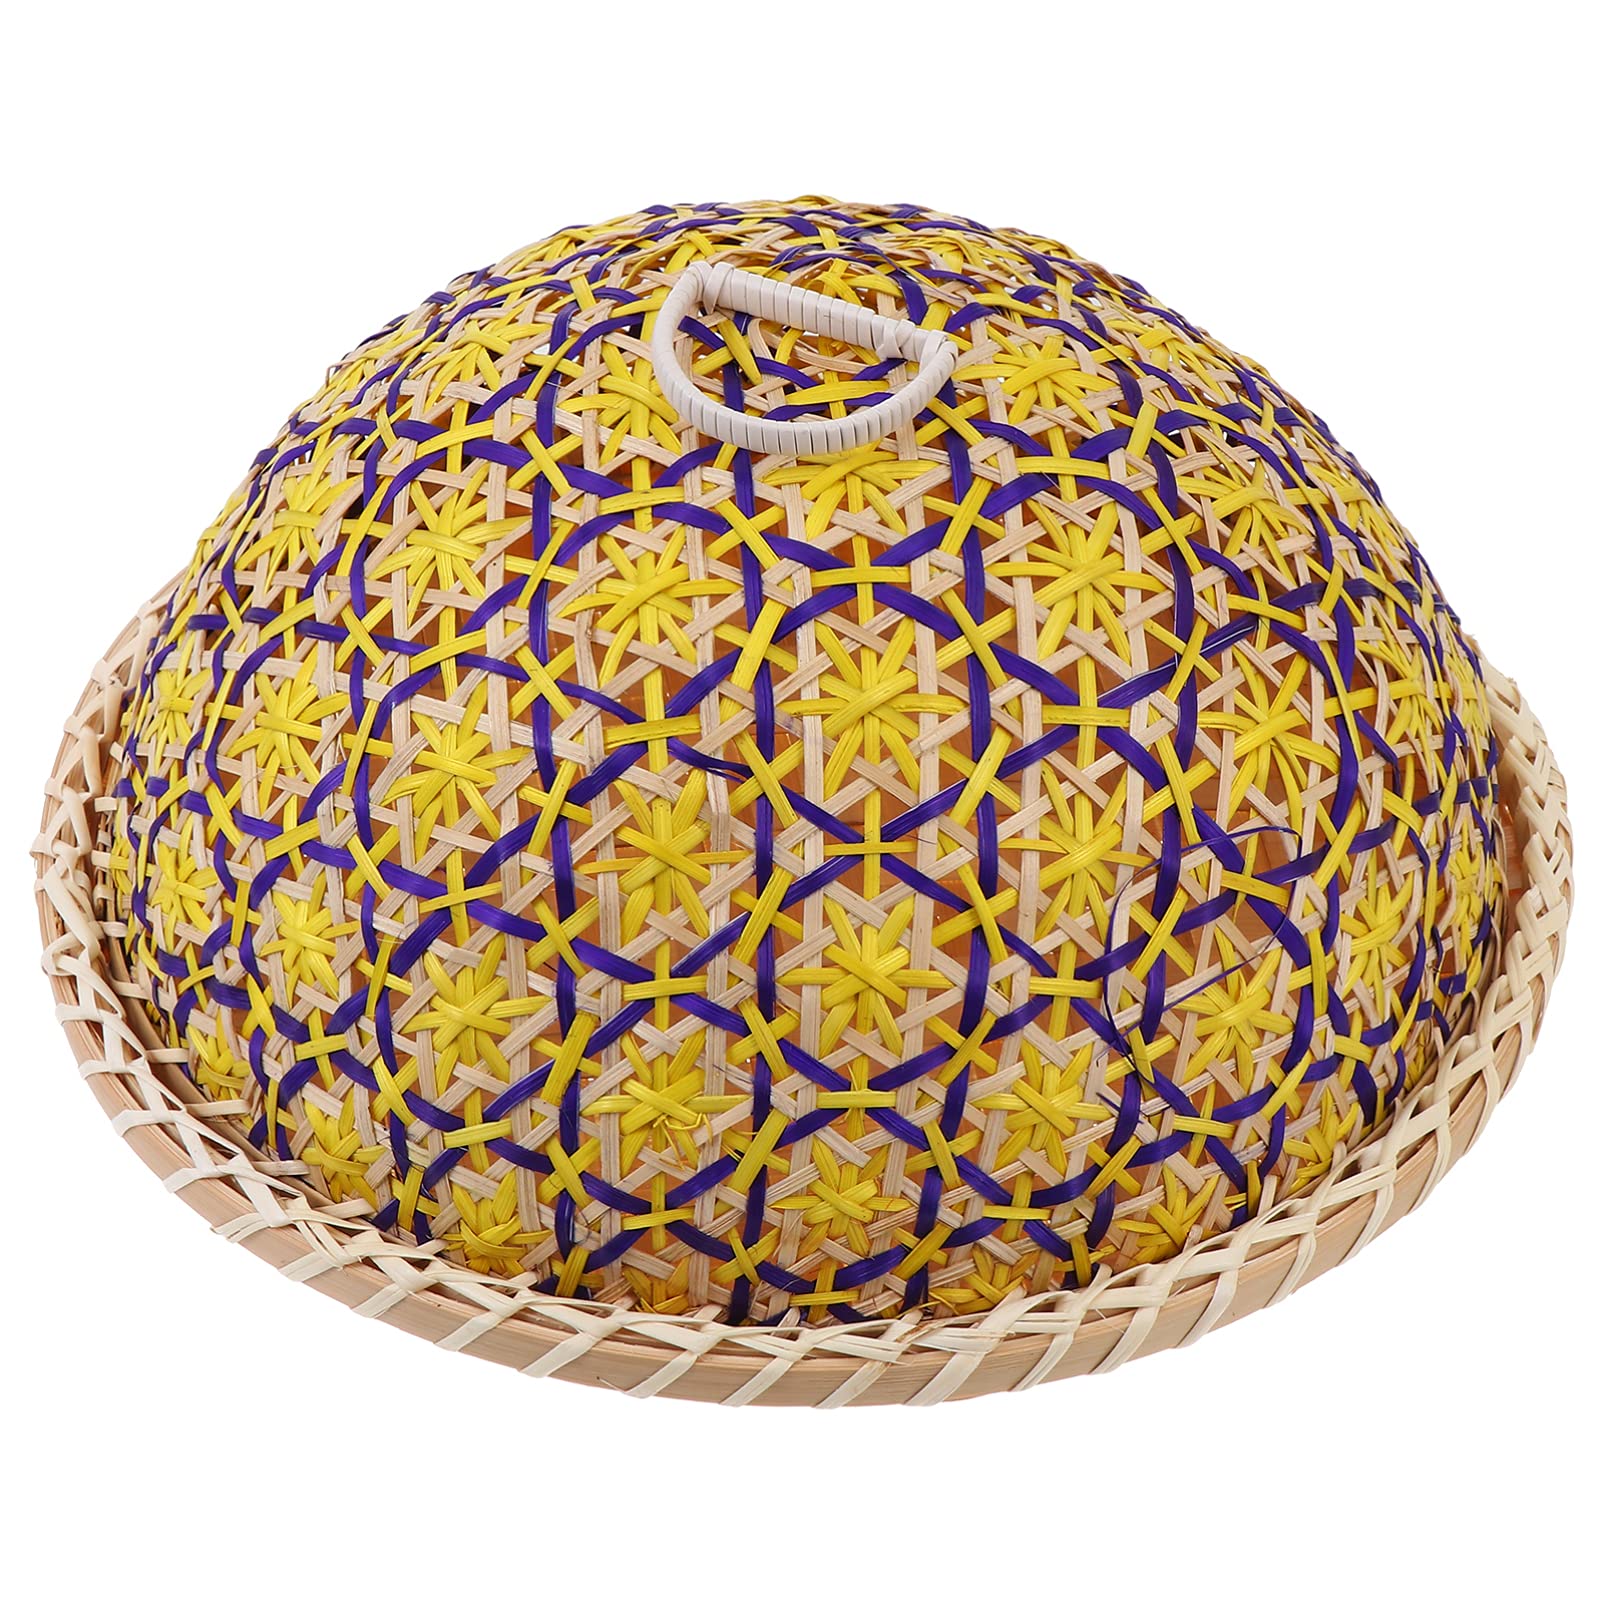 generic Hand- Woven Round Rattan Serving Tray with Food Dome Lid Cover for Picnic Party Bread Cake Pizza Dry Fruit Dessert Yellow Q1519432BAA 28x28cm